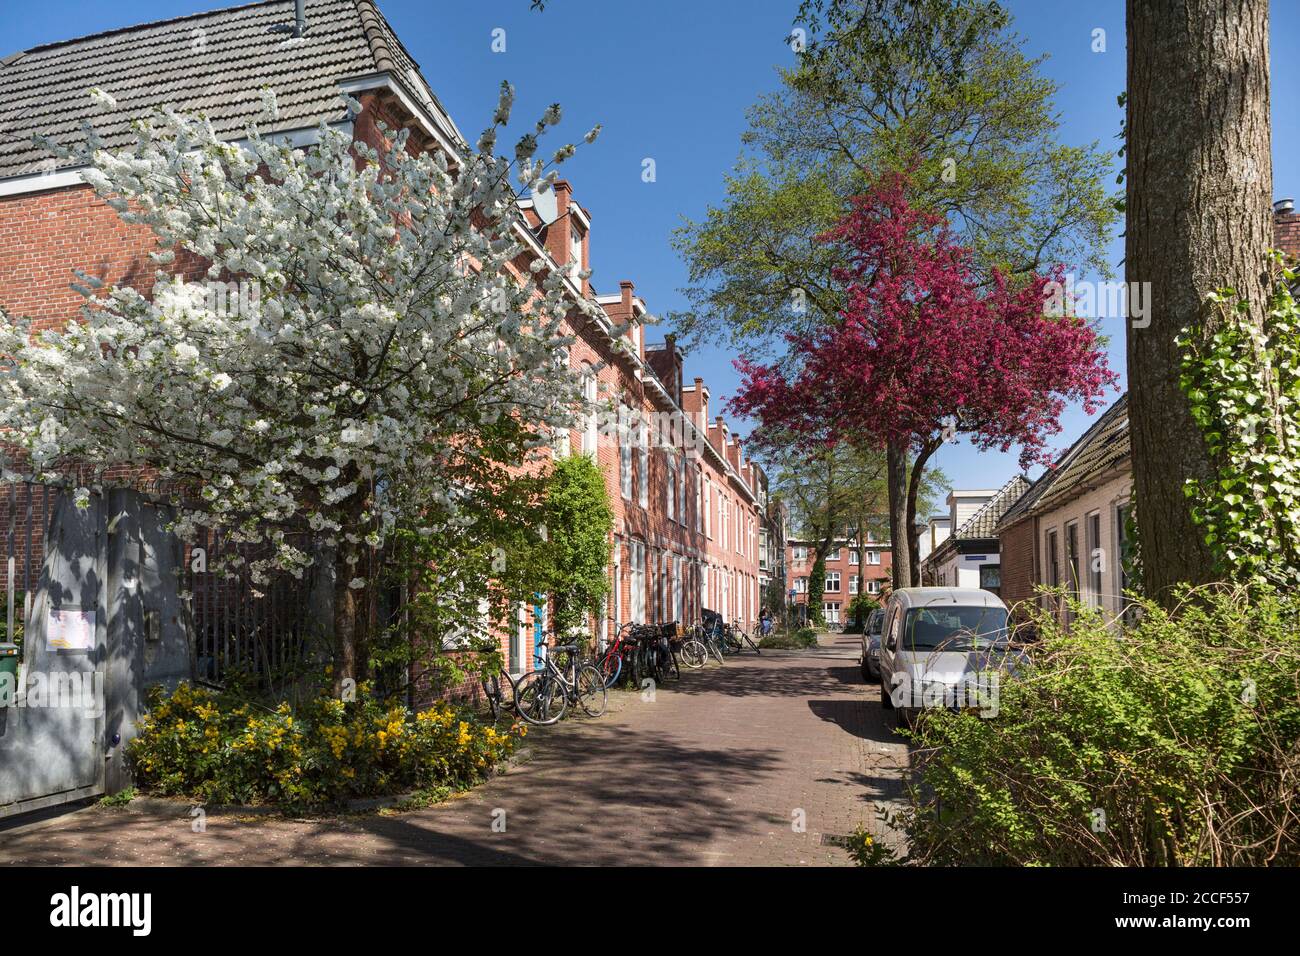 View of a small street in Groningen, the Netherlands Stock Photo